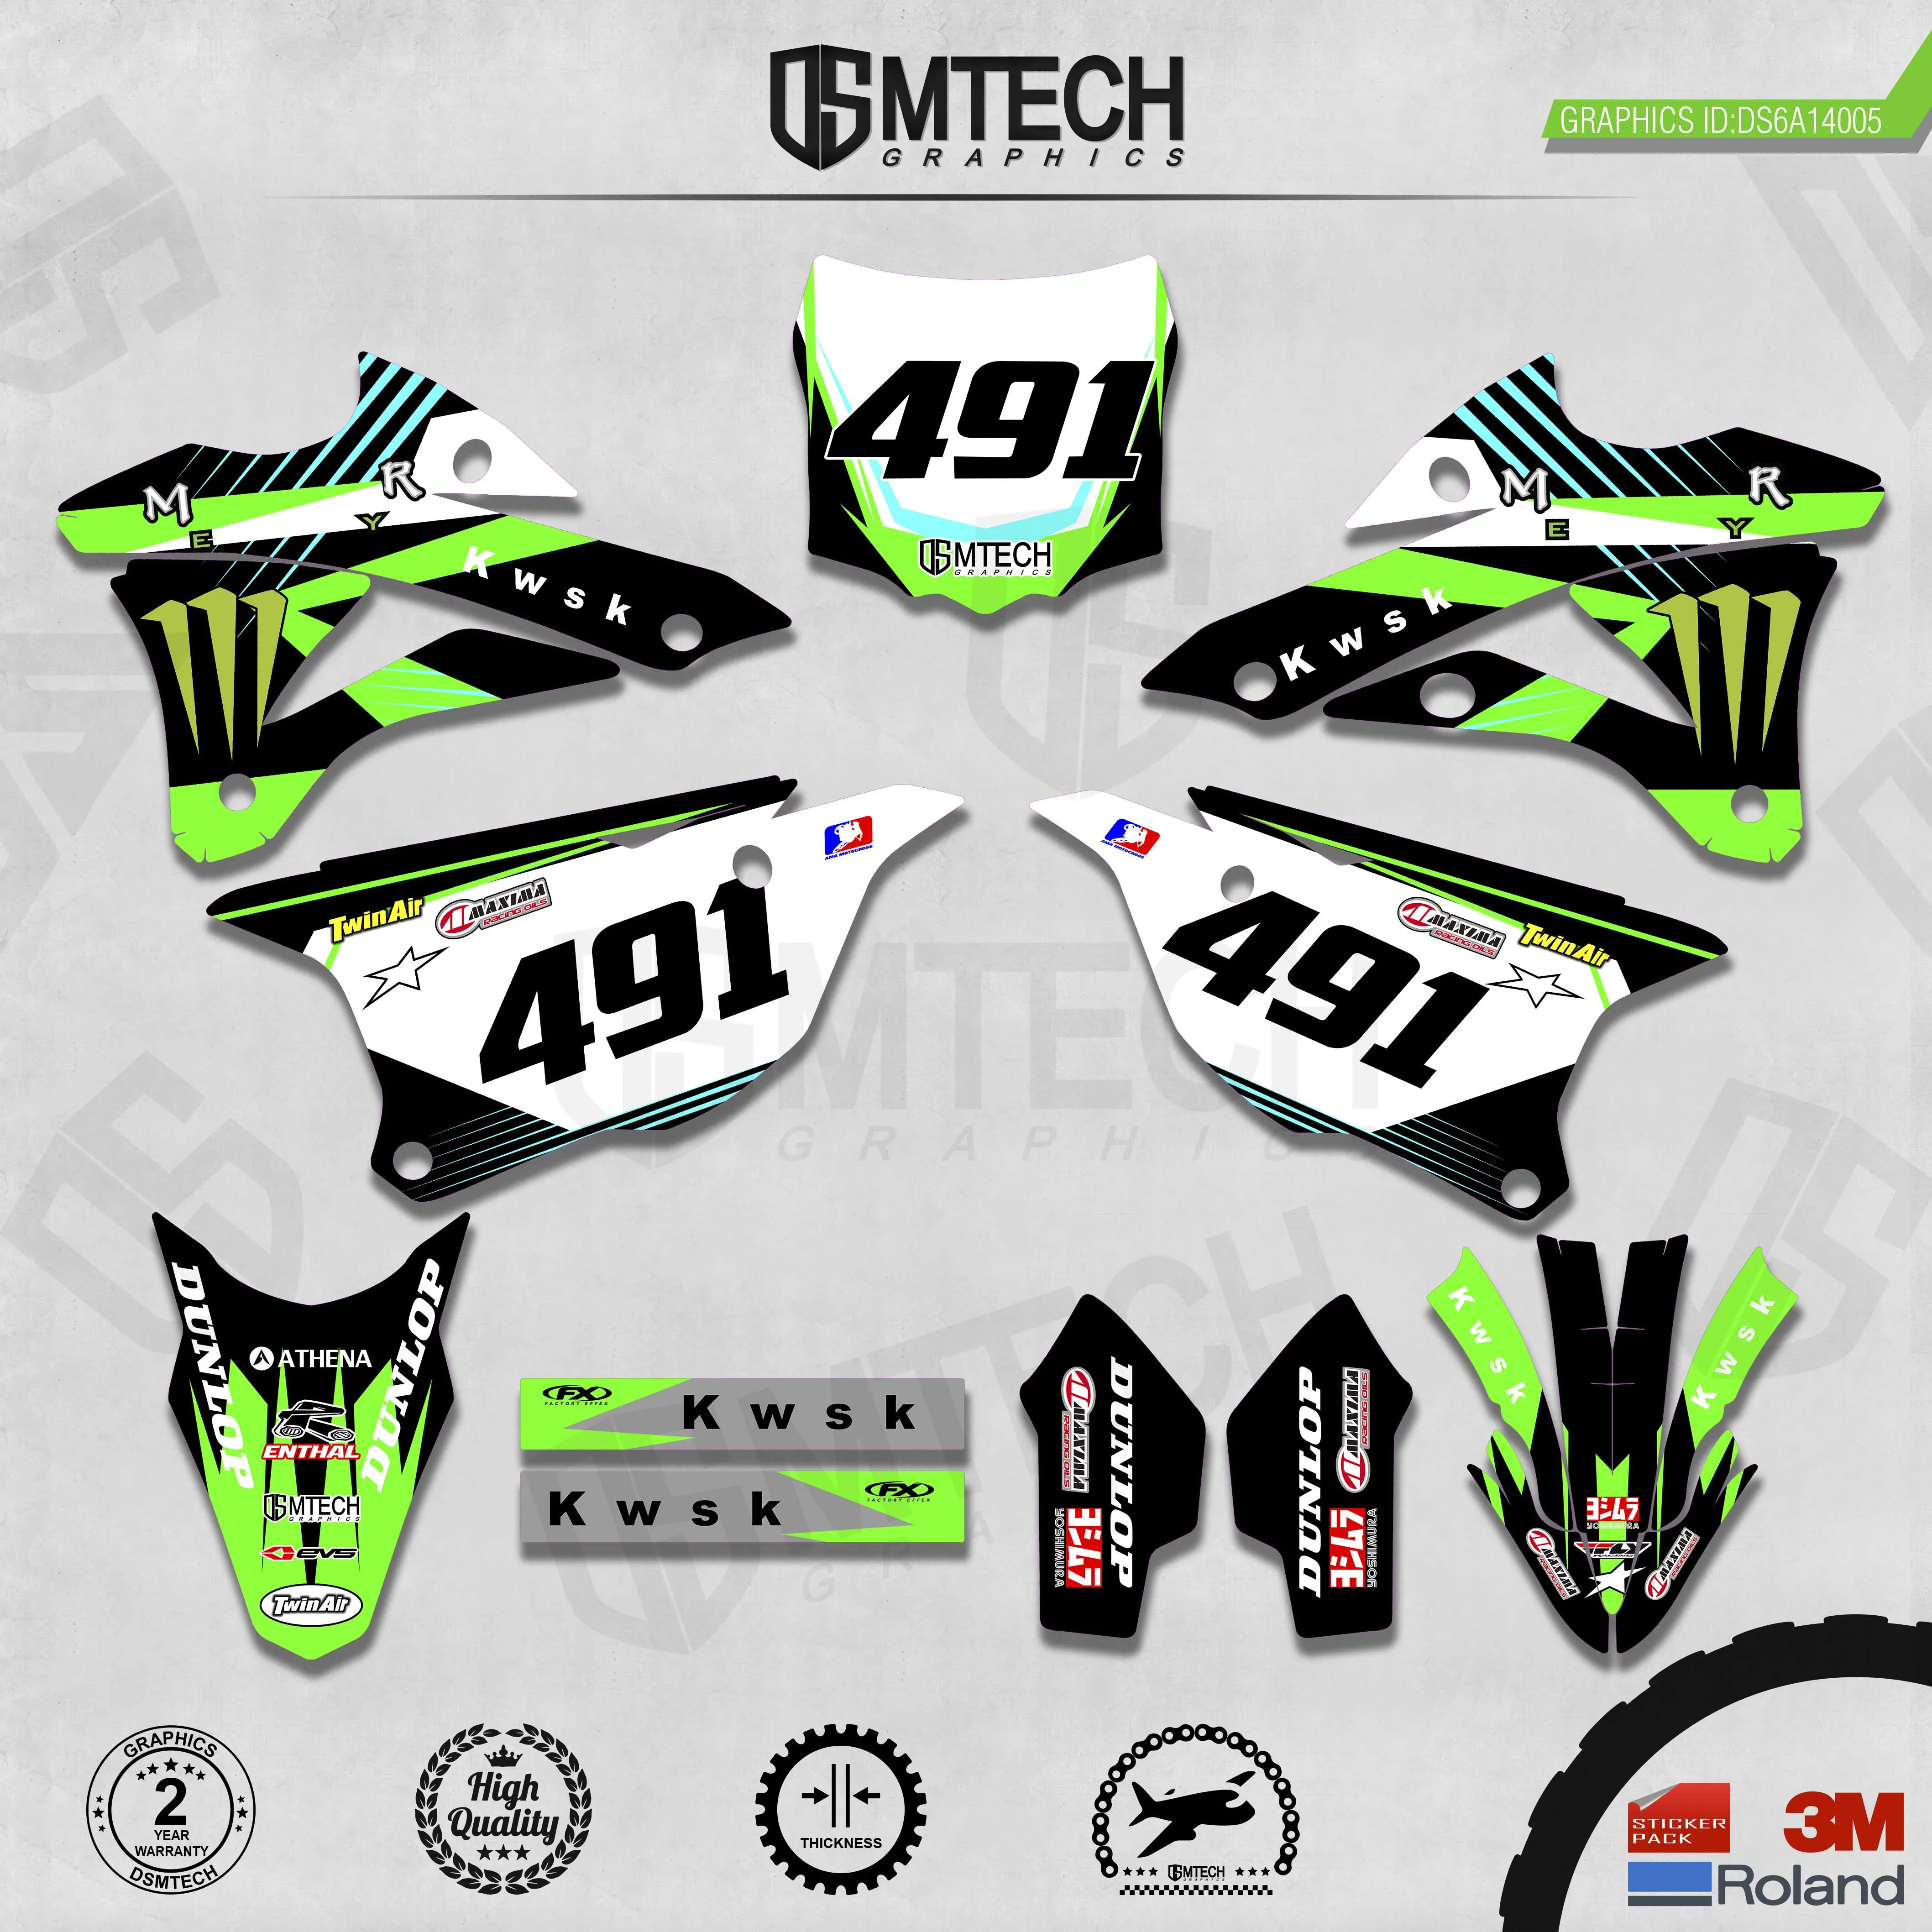 DSMTECH Customized Team Graphics Backgrounds Decals 3M Custom Stickers For KAWASAKI  2014 2015 2016 2017 2018 2019 KX85-100 005